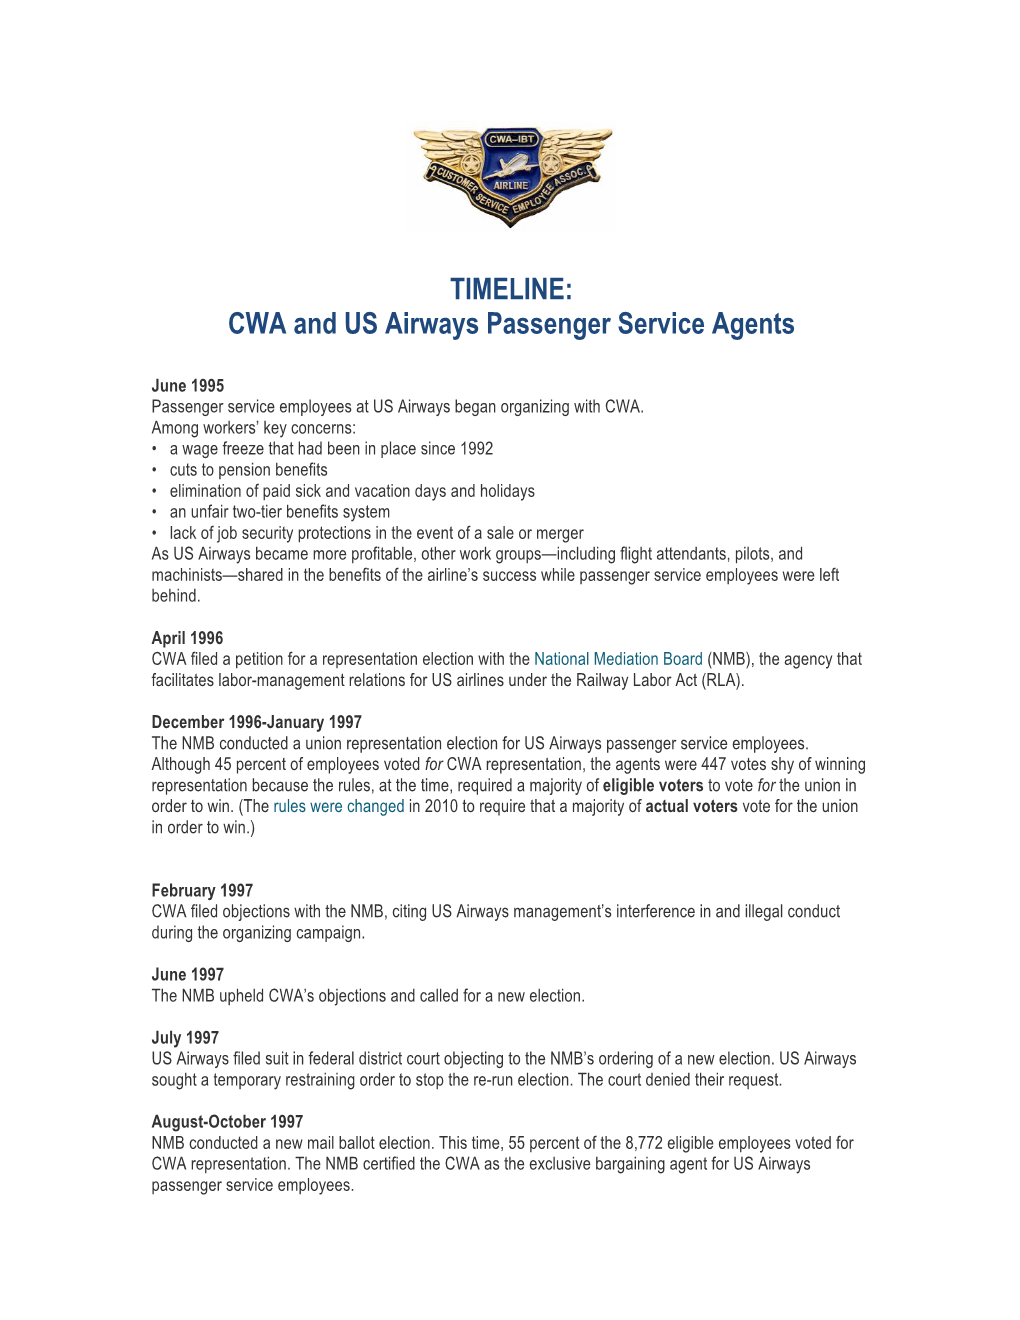 TIMELINE: CWA and US Airways Passenger Service Agents